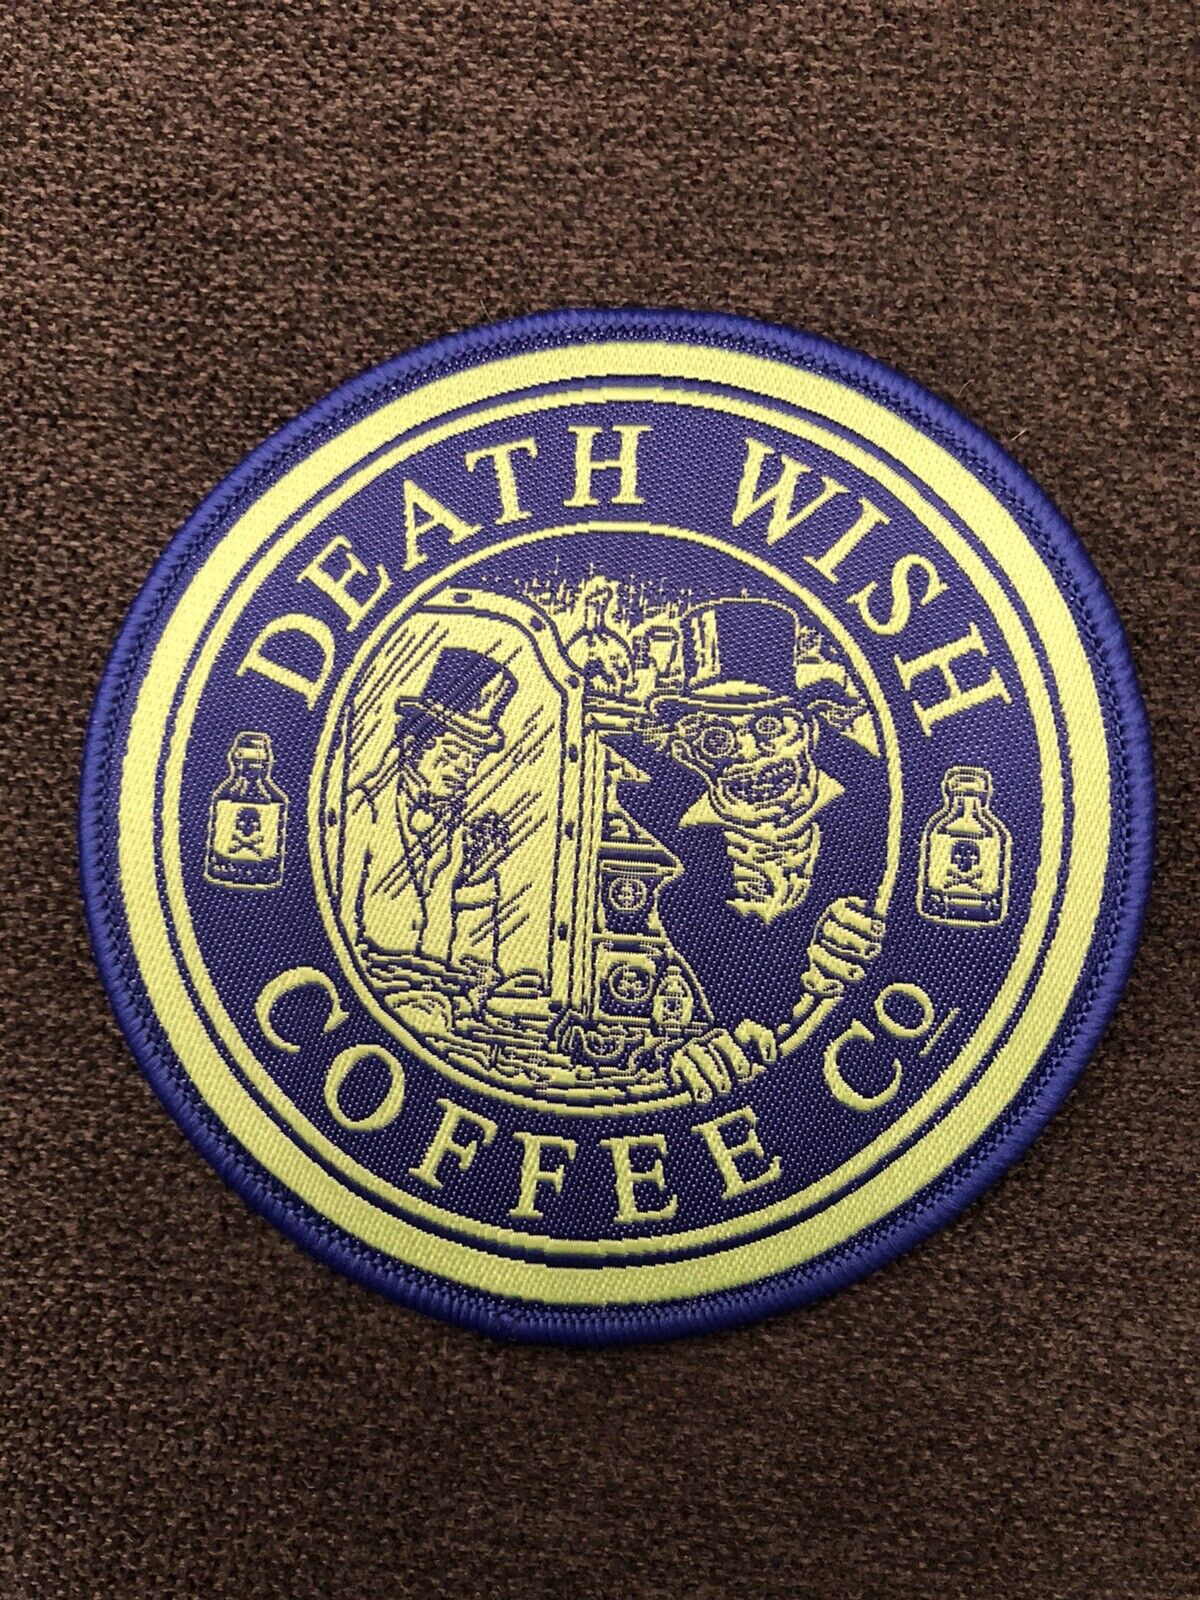 Death Wish Coffee Company Dr. Jekyll and Mr. Hyde Limited Edition Patch